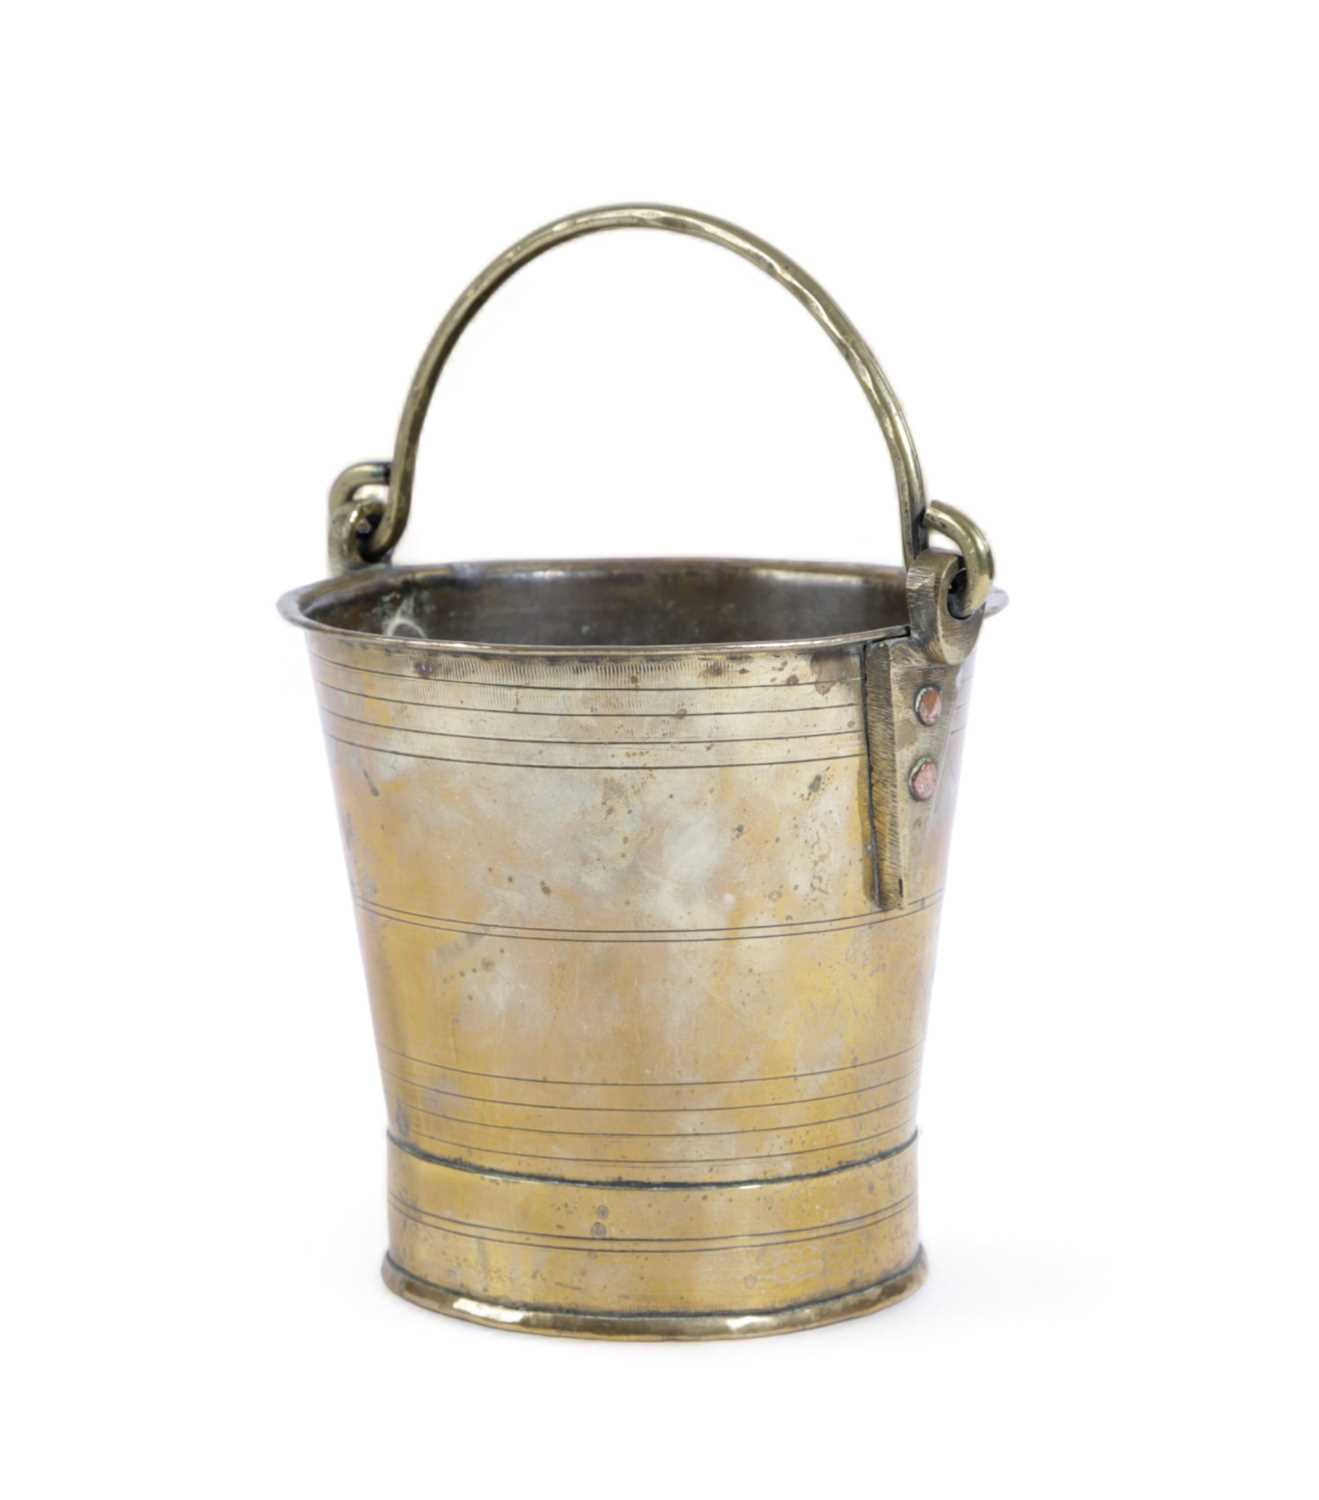 A REGENCY BRASS BUCKET C.1820 with lathe-turned ring decoration and a swing handle 27.5cm high, 29cm